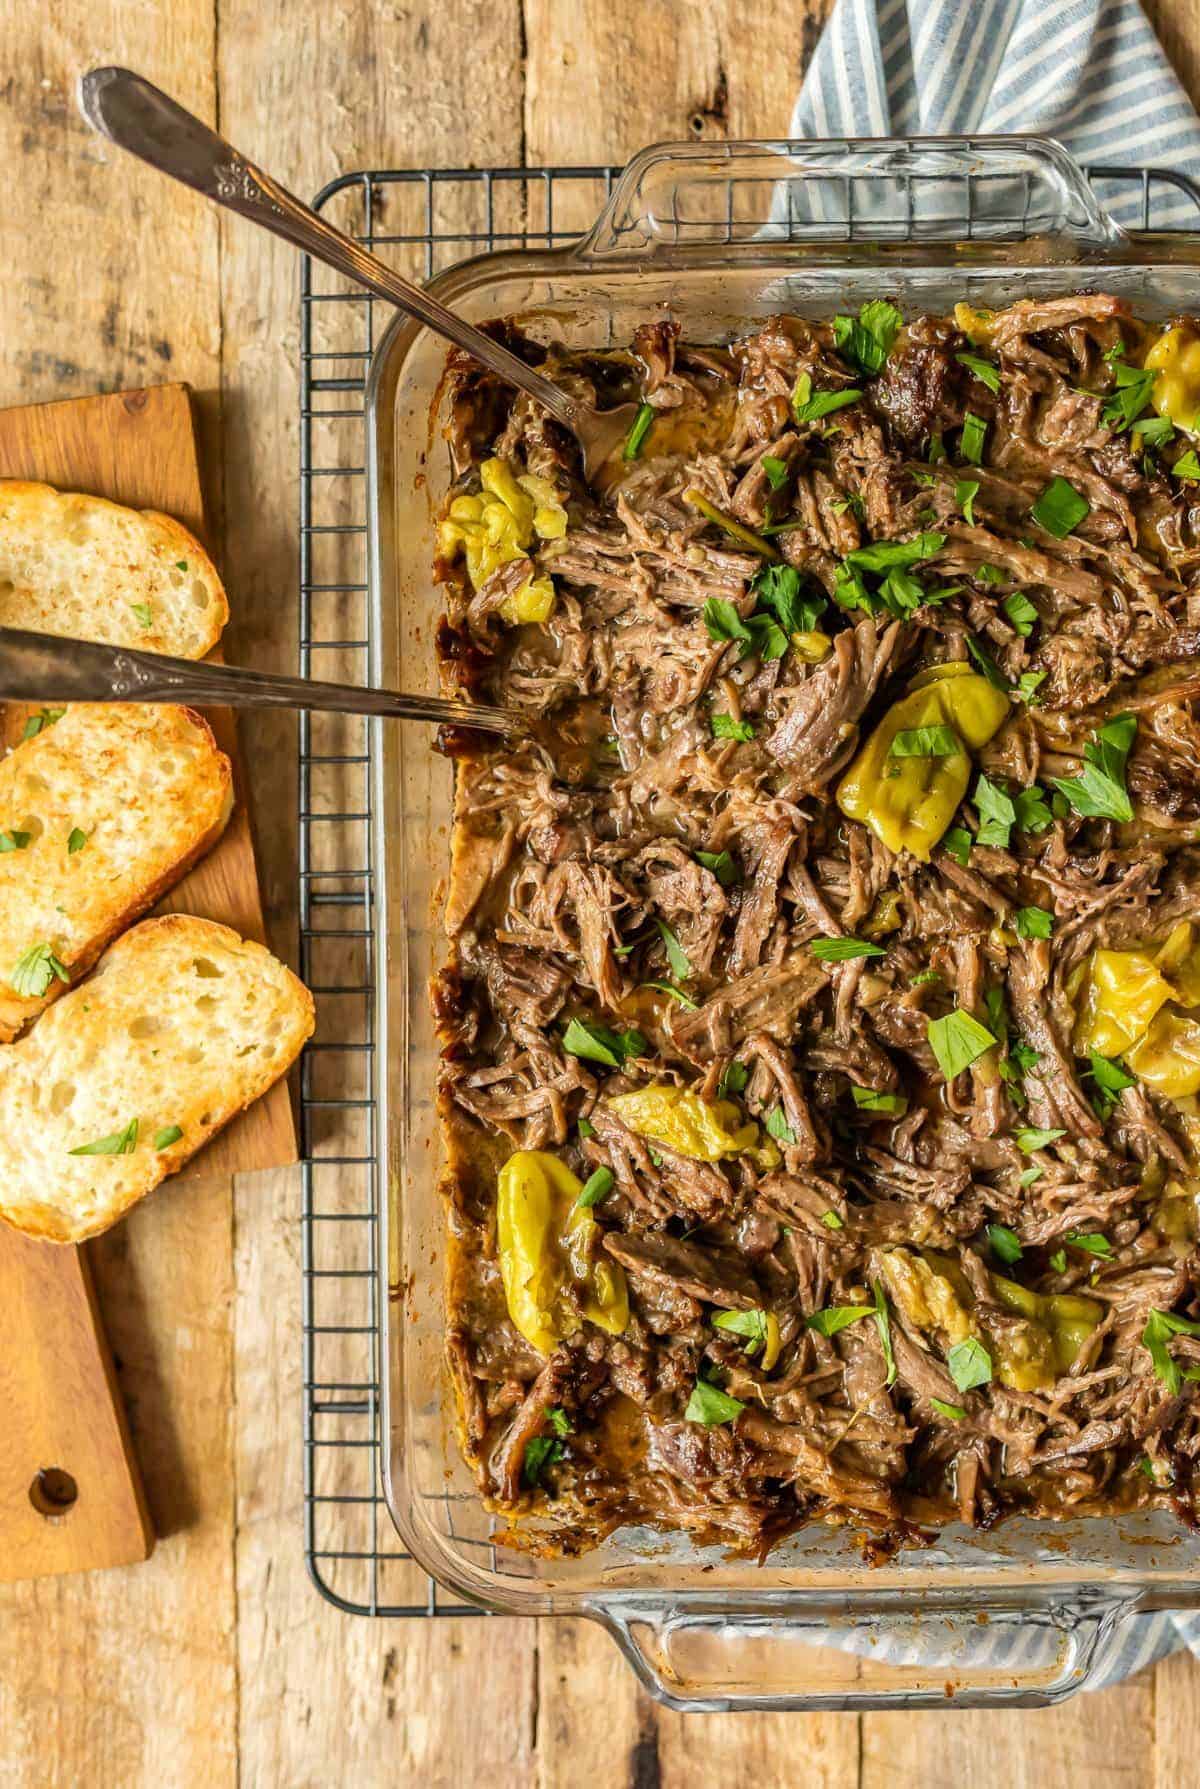 This MISSISSIPPI ROAST is the absolute best slow cooker roast beef you will EVER make! Made famous throughout the years, you just have to try this! Perfect crockpot roast beef for sandwiches, tacos, and beyond!